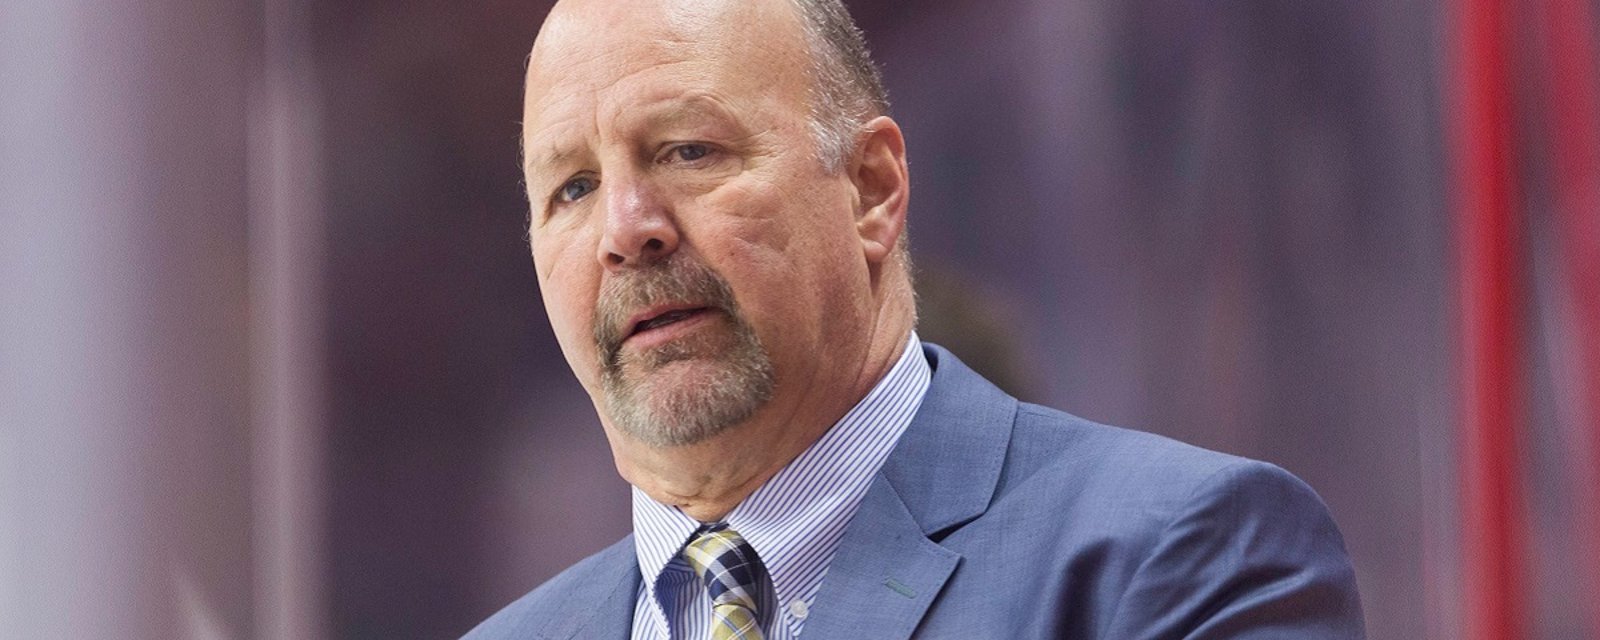 NHL agent accuses Stanley Cup winning coach of bigotry, matter is being investigated.